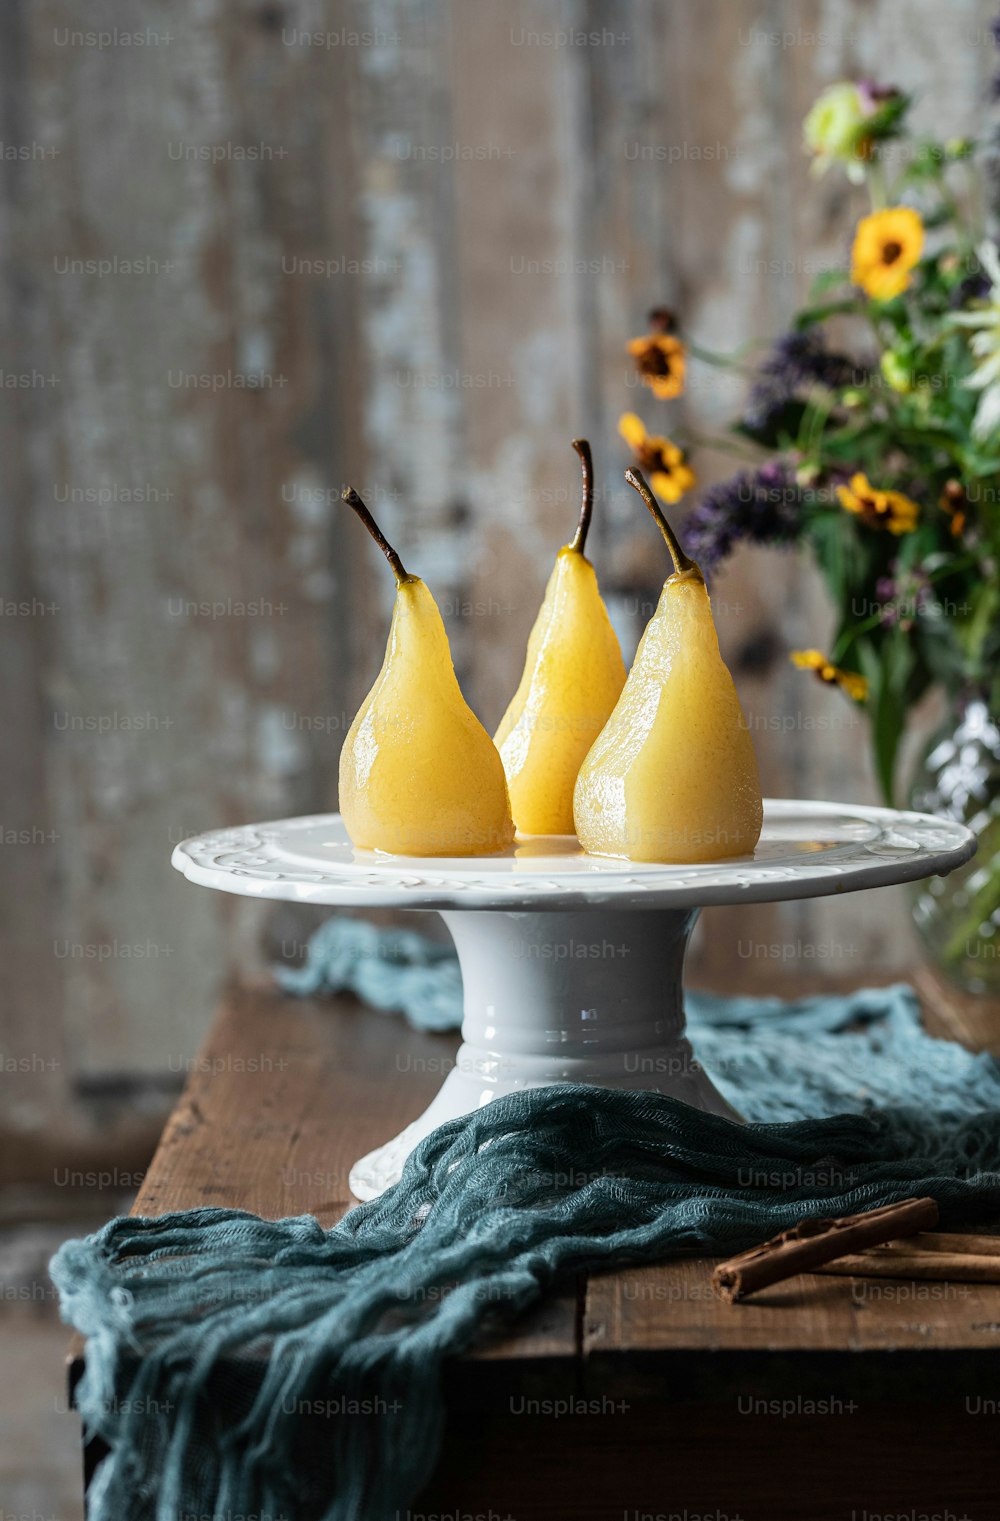 three pears on a white plate next to a vase of flowers